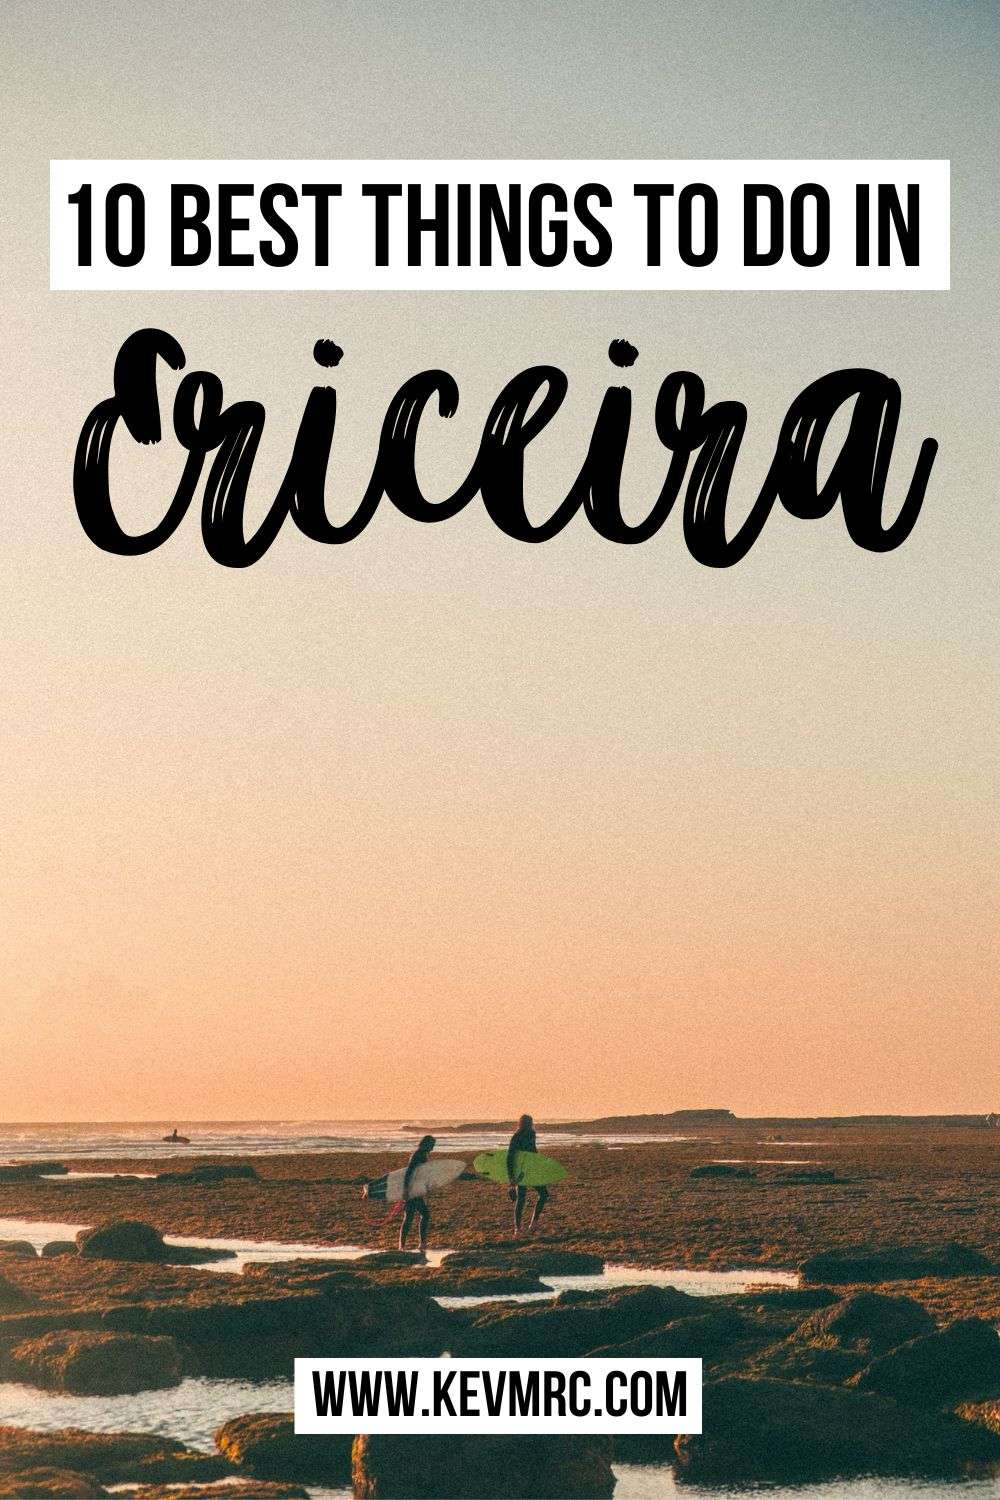 Wondering what to do in Ericeira Portugal? Find out here the 10+ best things to do in Ericeira, with info and expert tips to plan your trip. #ericeira